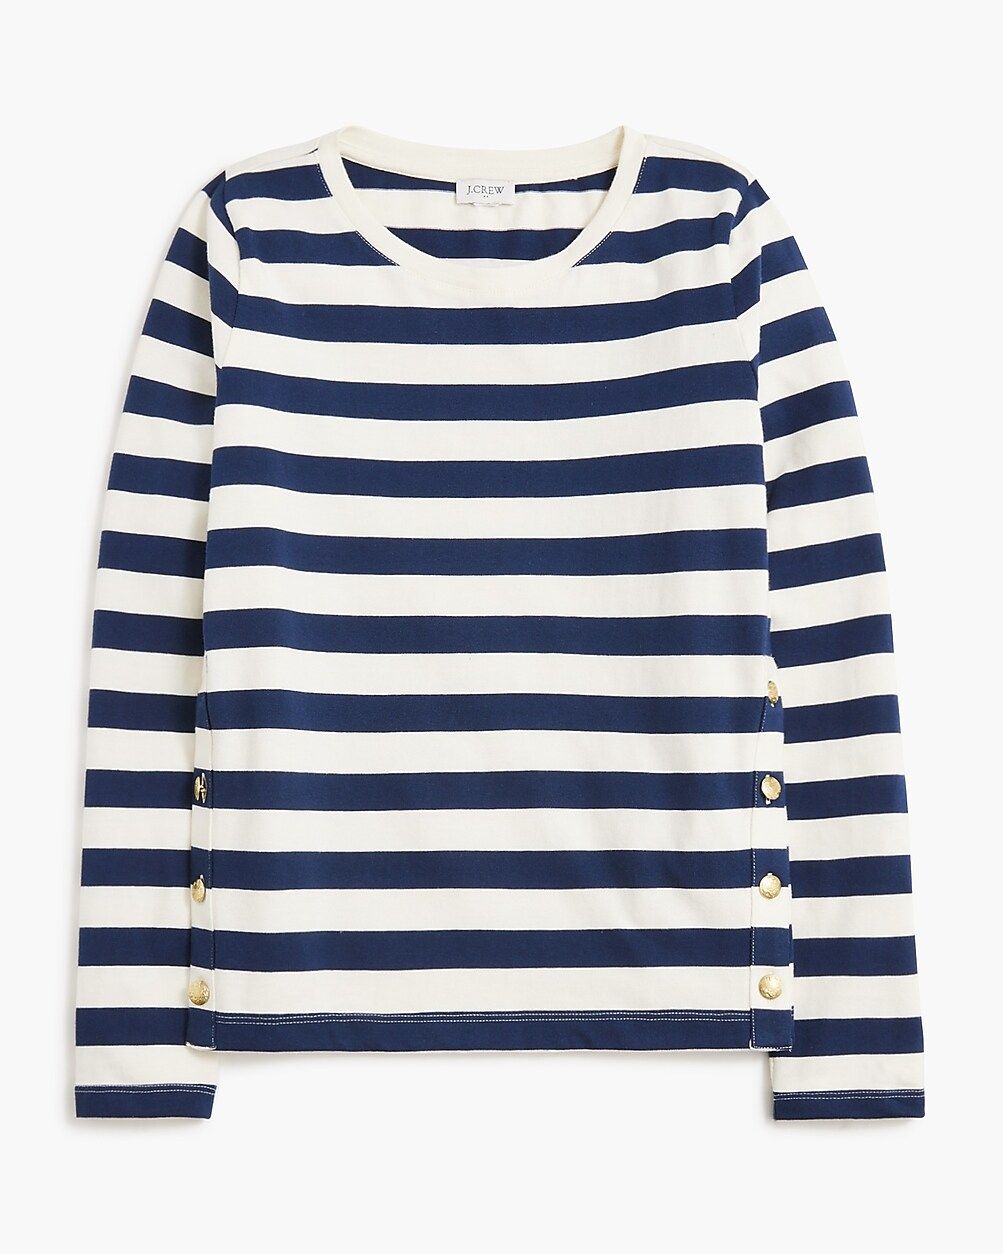 Striped button-side tee | J.Crew Factory